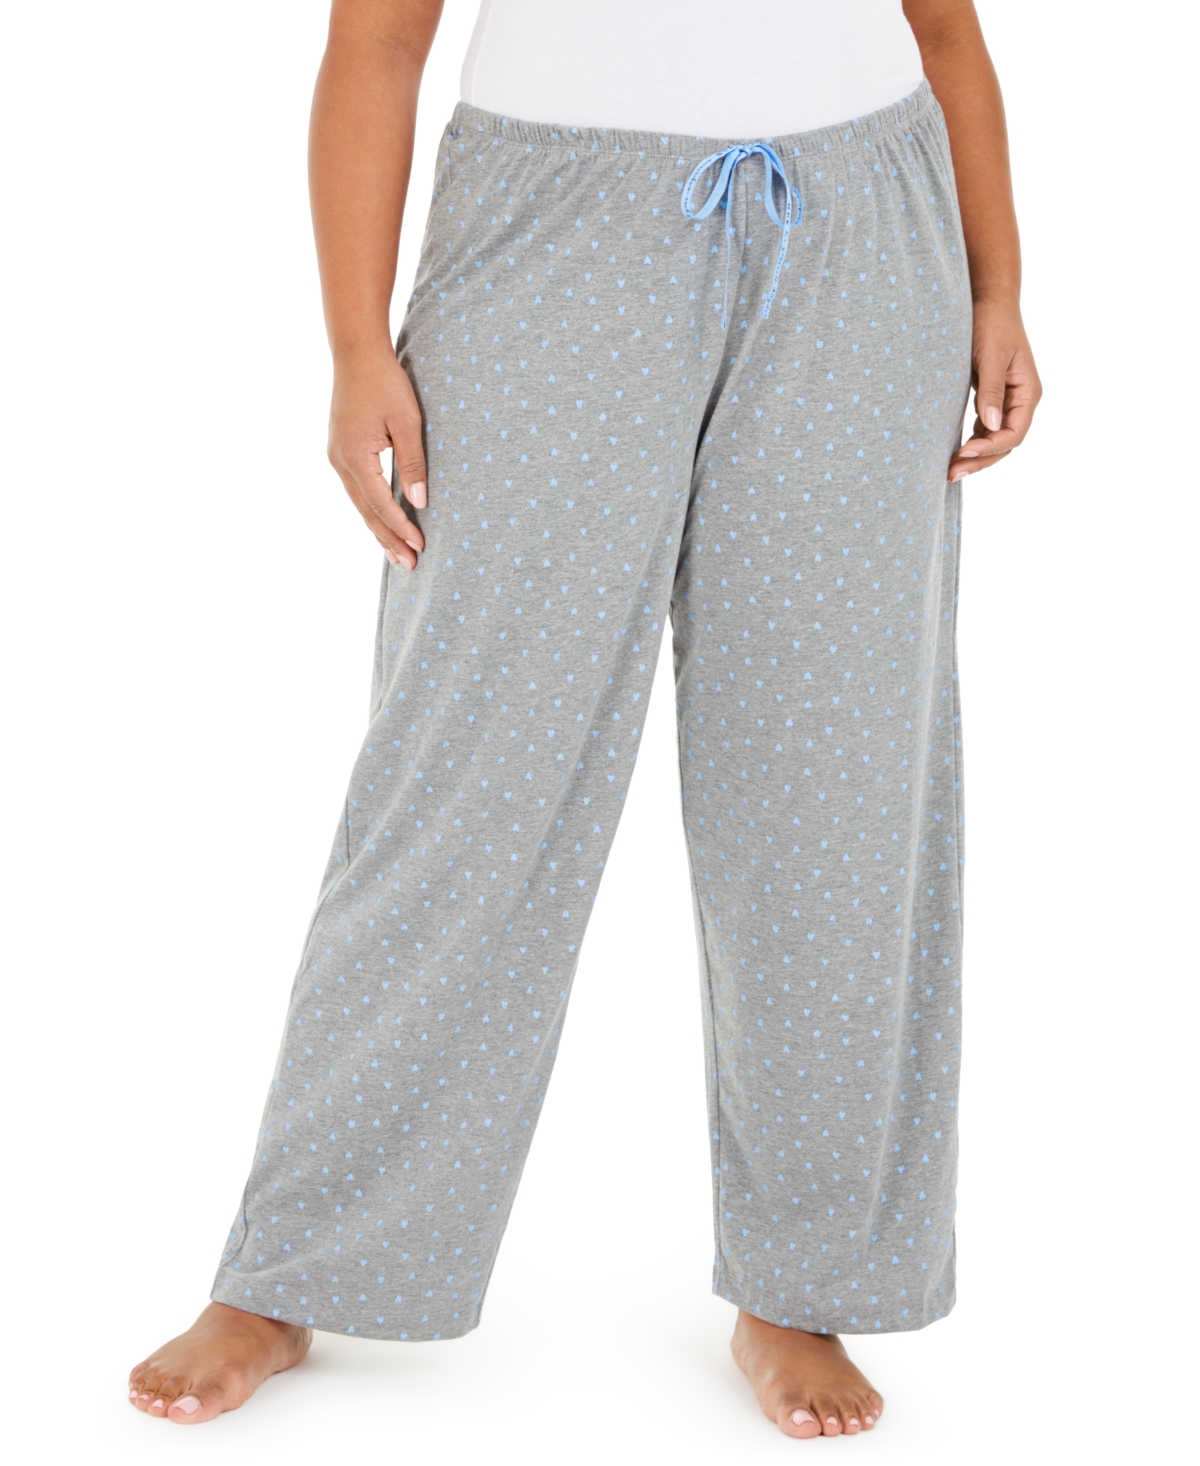 Womens Plus size Sleepwell Printed Knit pajama pant made with Temperature Regulating Technology - Bella Blue